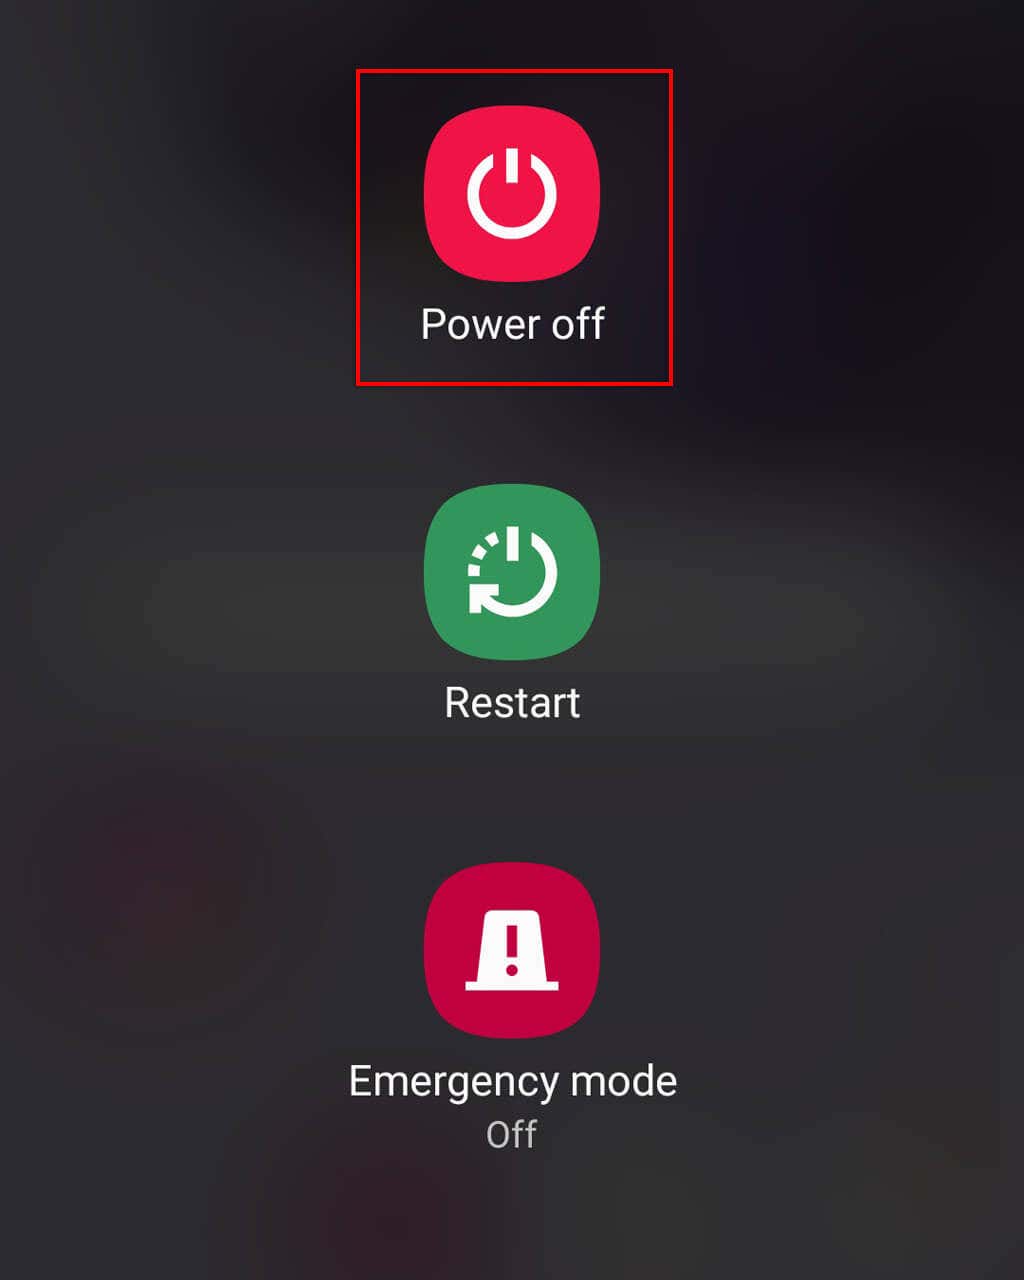 Turn off your device by pressing the power button
Wait for a few seconds and turn on your device again